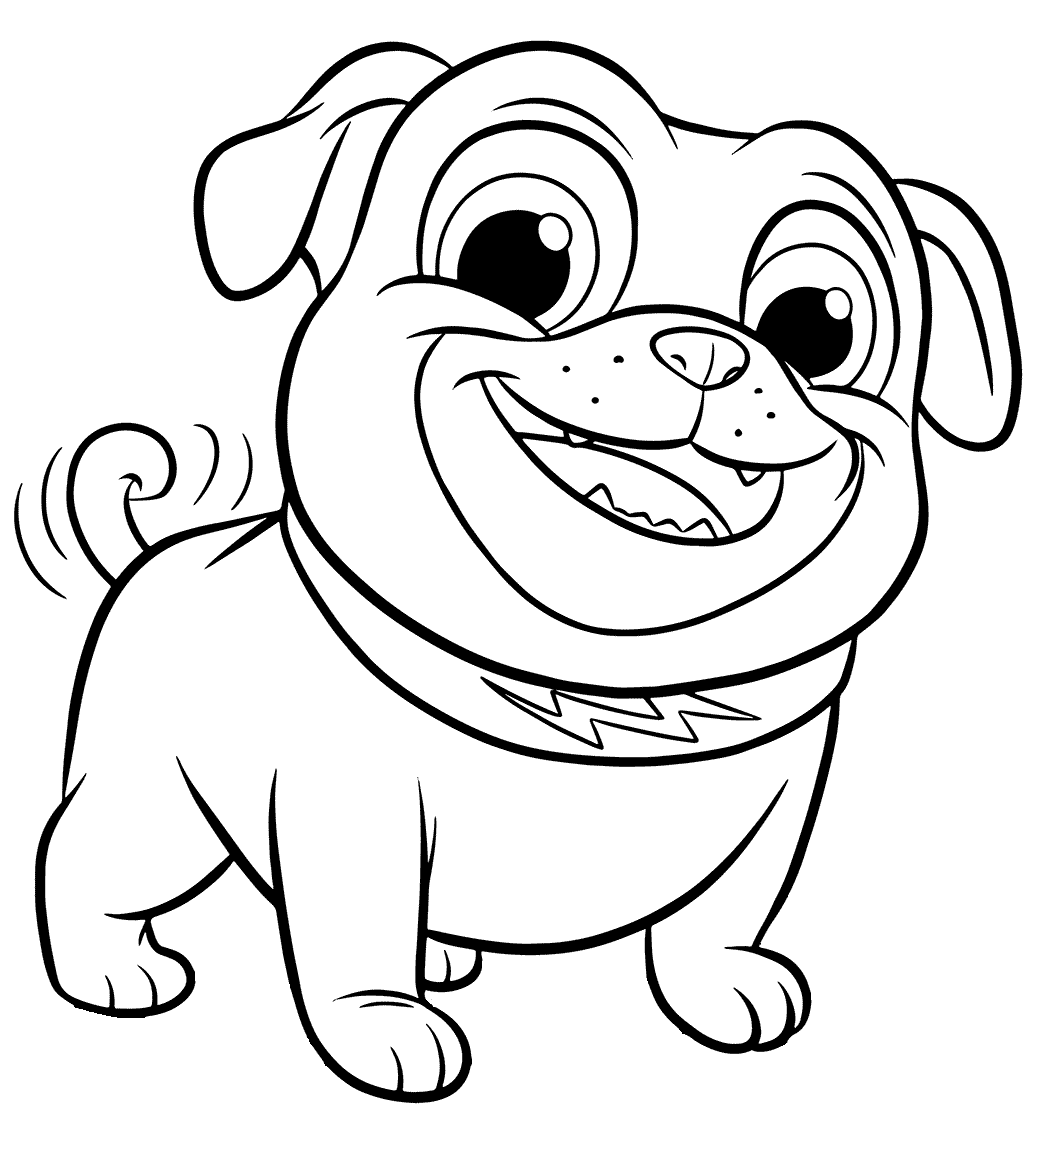 Puppy dog pals coloring pages printable for free download